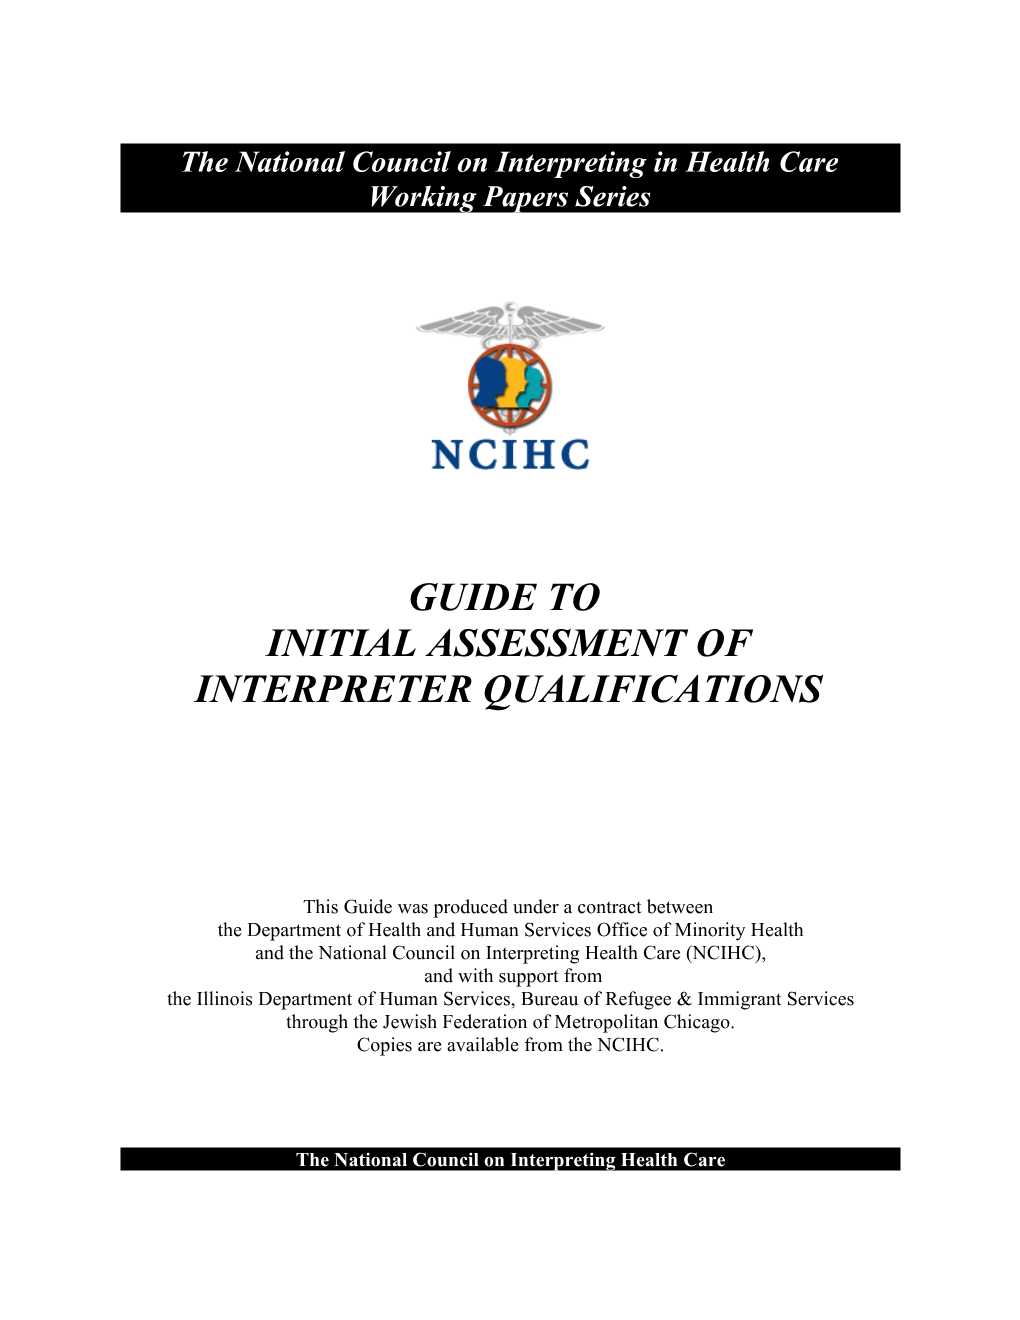 The National Council on Interpretation in Health Care